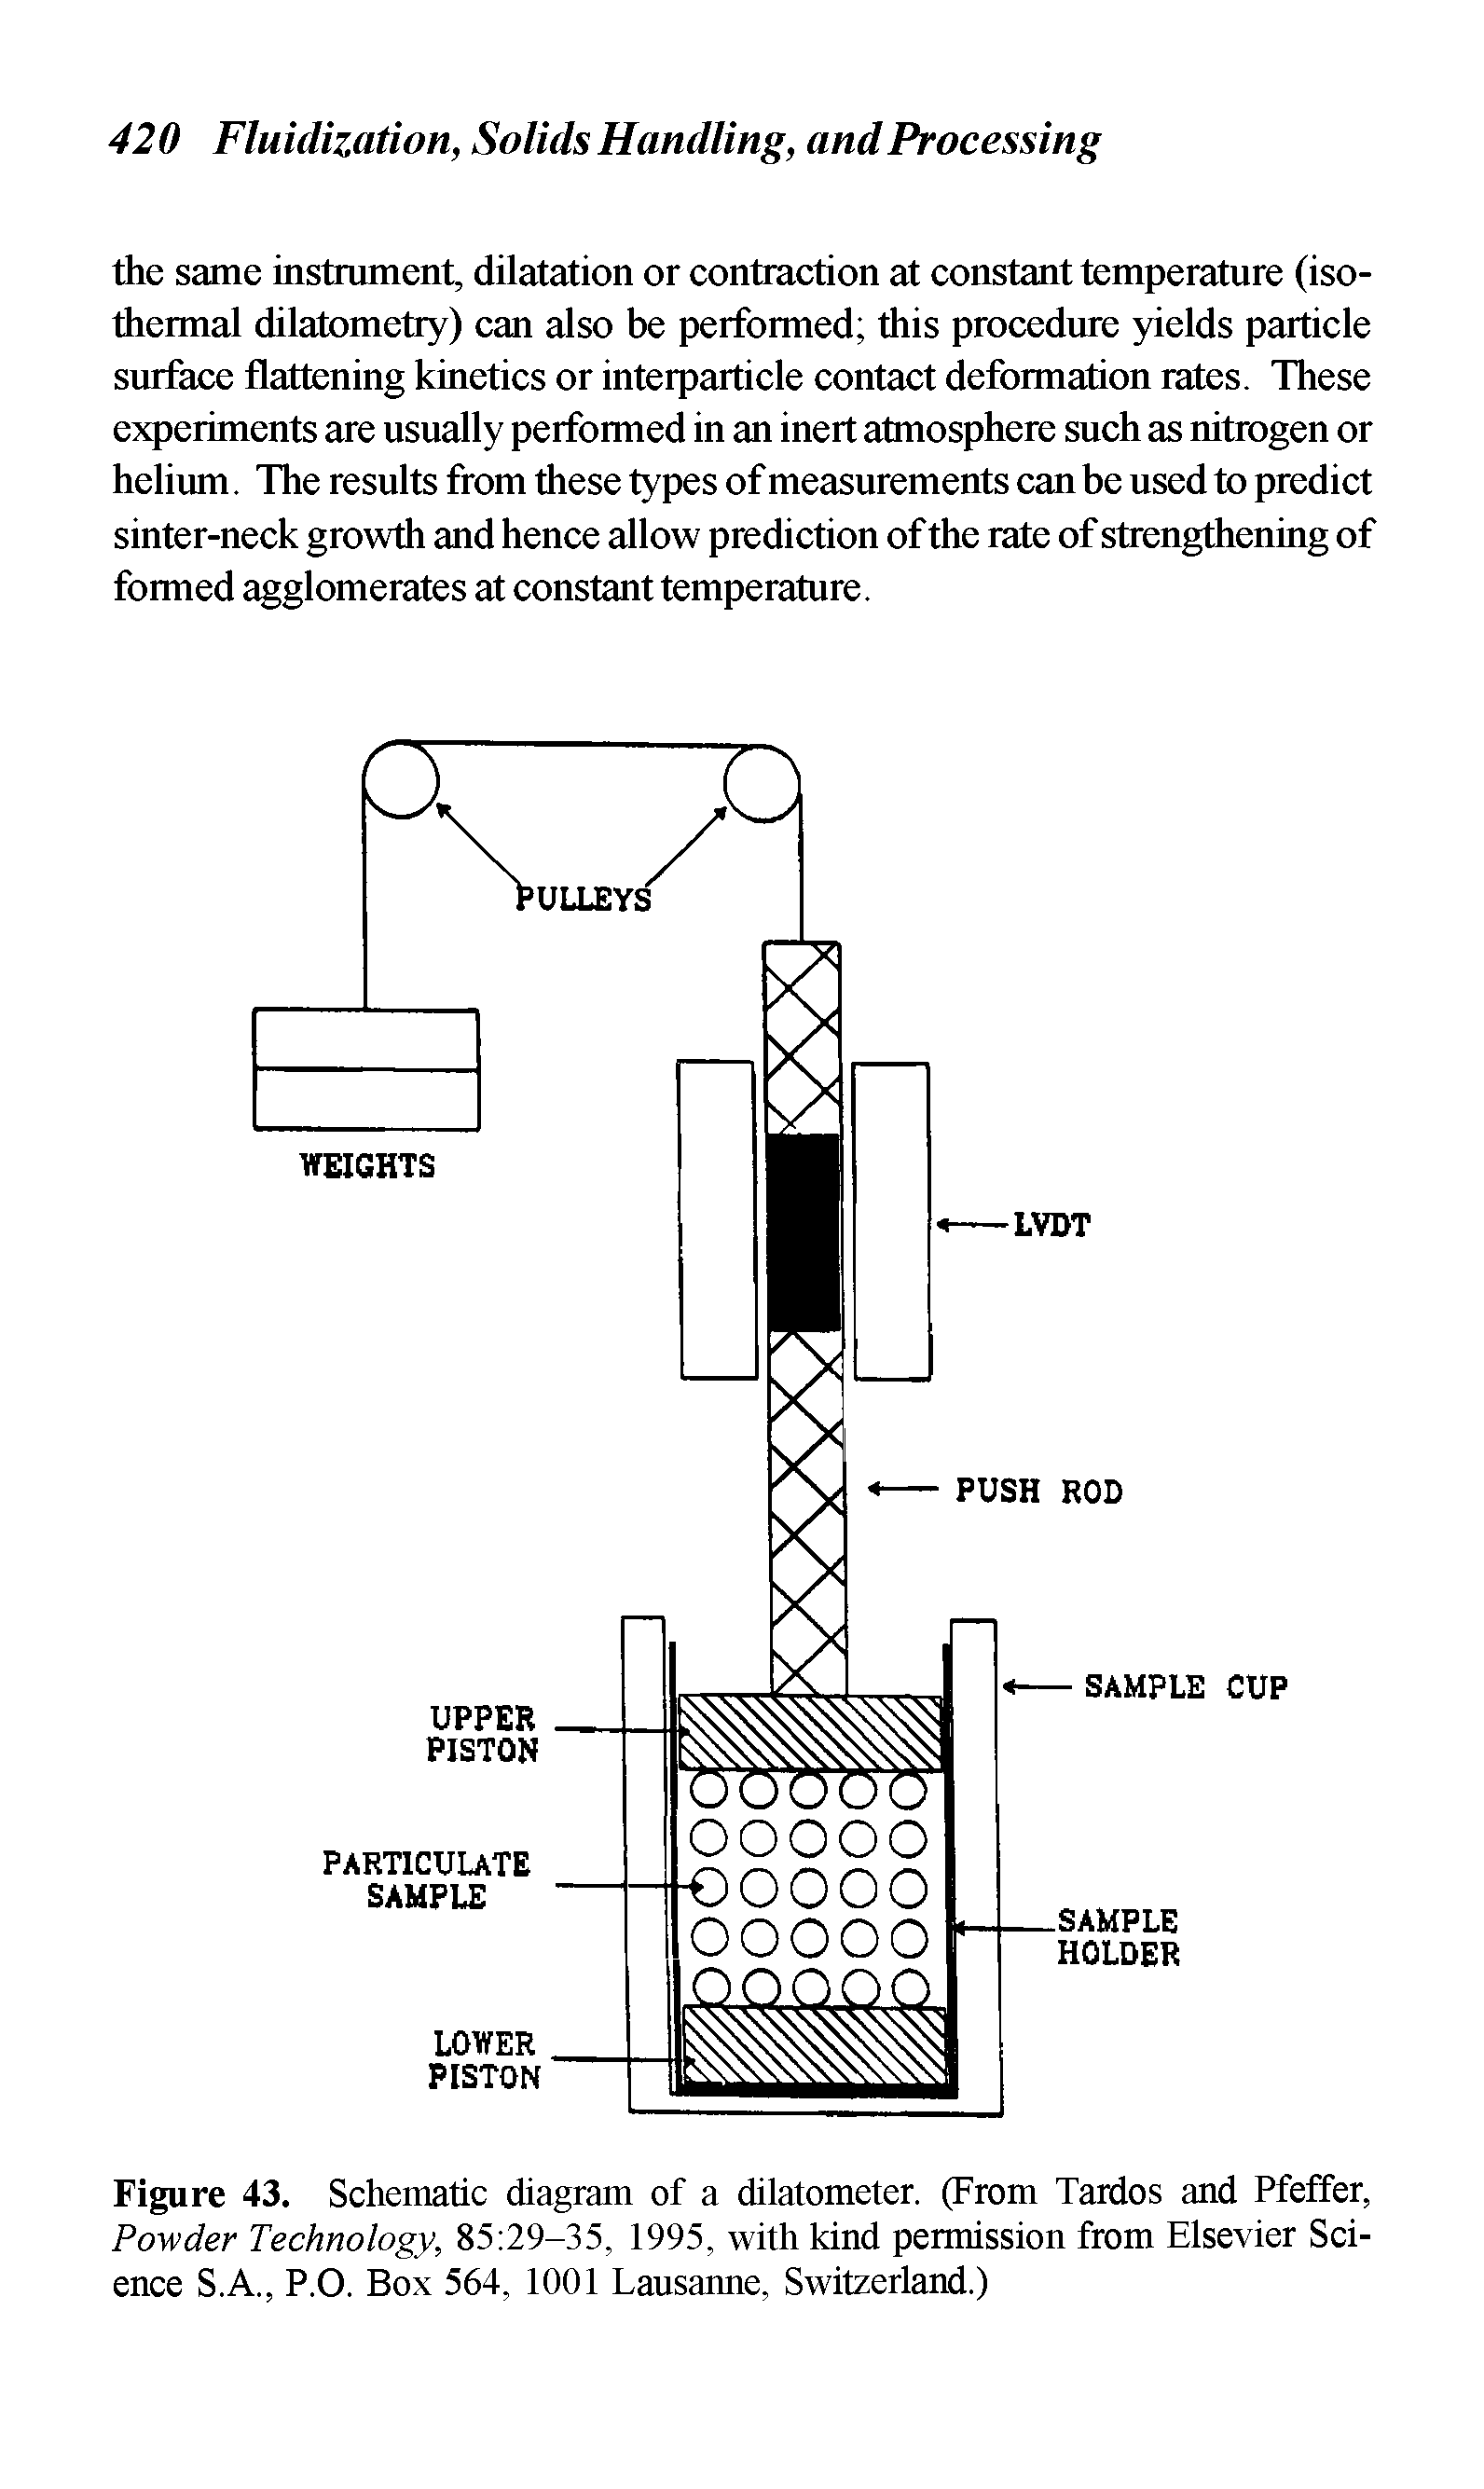 Figure 43. Schematic diagram of a dilatometer. (From Tardos and Pfeffer, Powder Technology, 85 29-35, 1995, with kind permission from Elsevier Science S.A., P.O. Box 564, 1001 Lausanne, Switzerland.)...